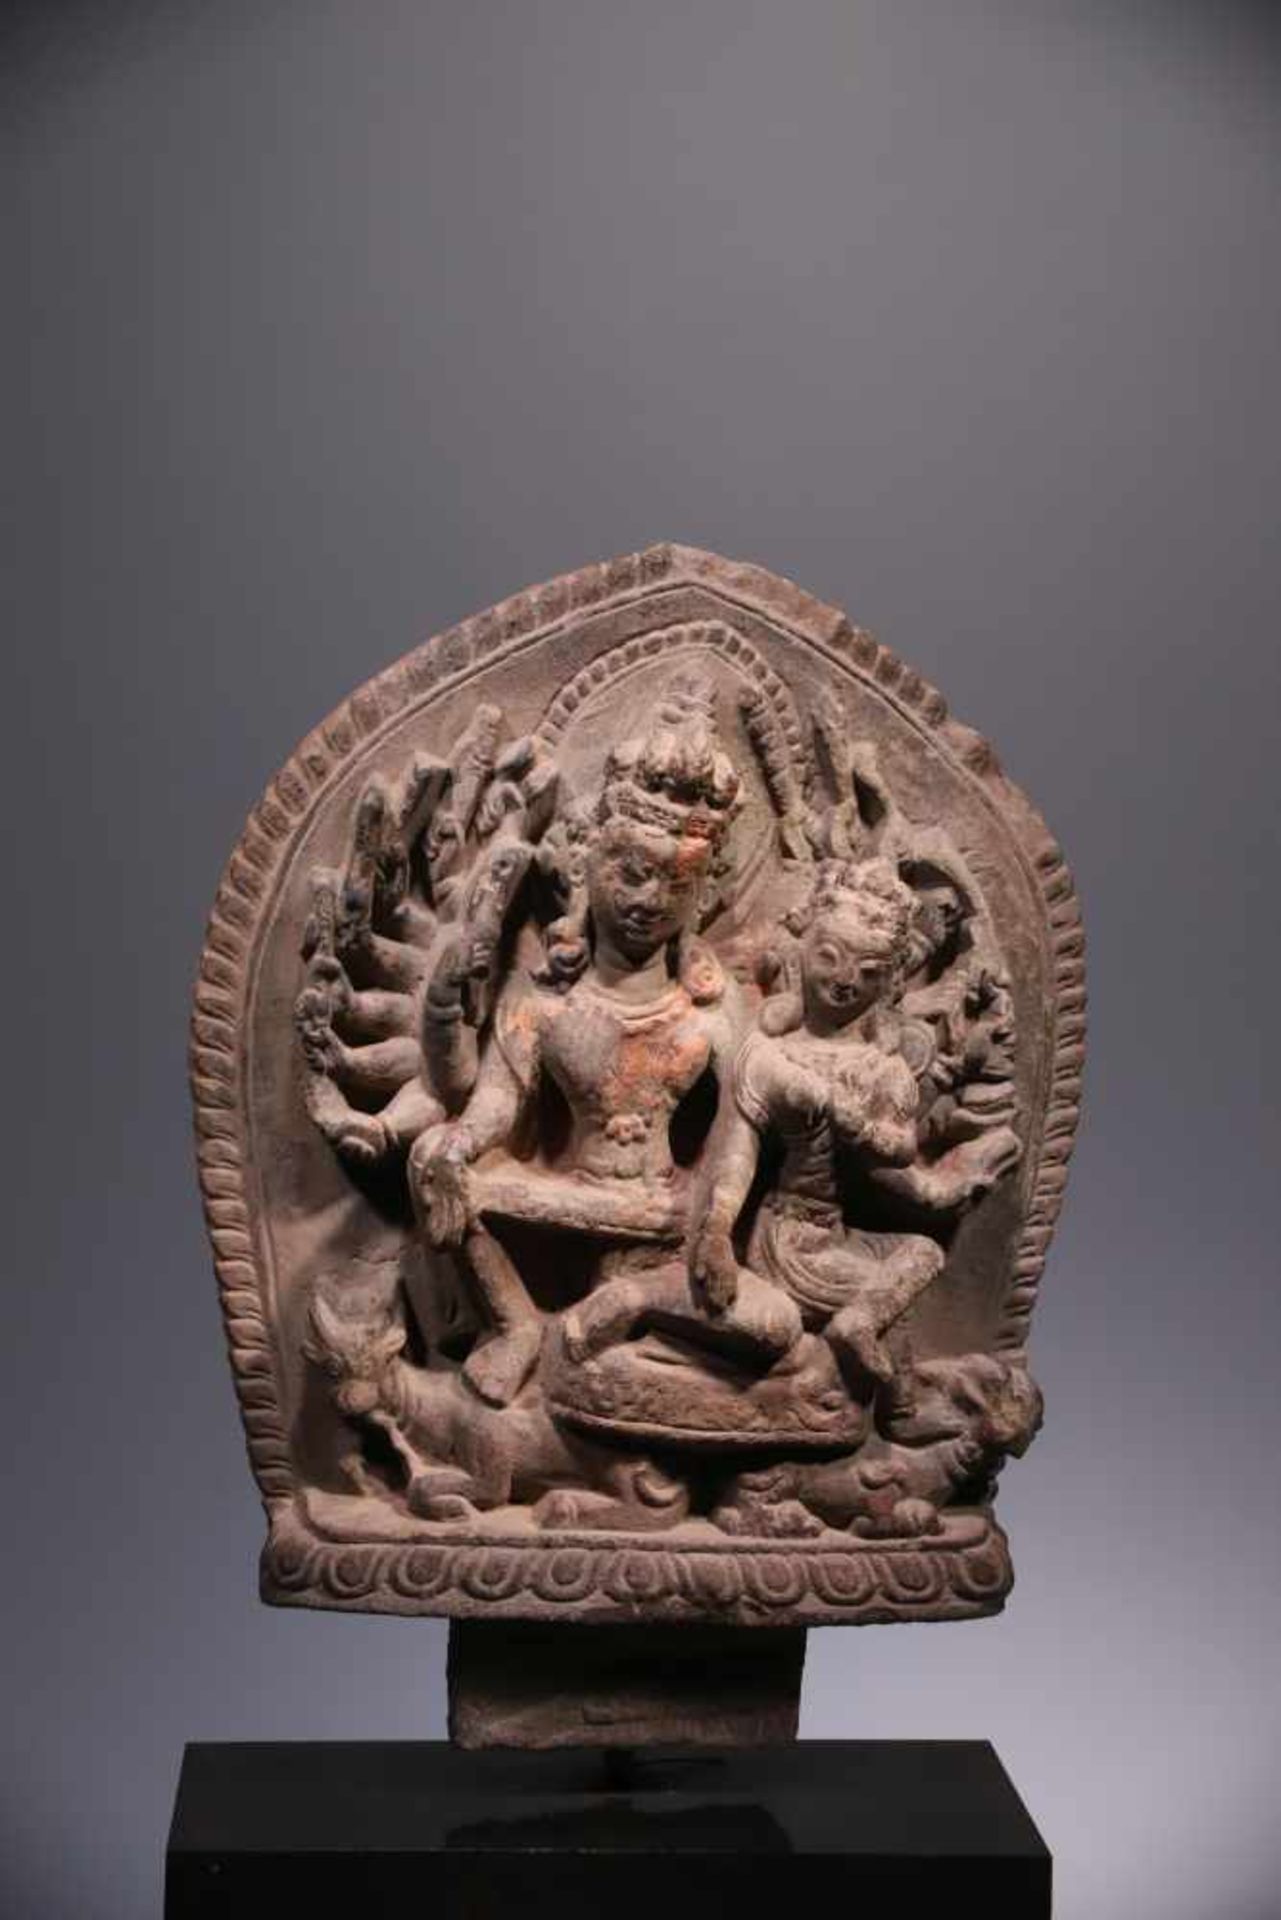 SHIVA AND PARVATI IN TANTRIC FORM